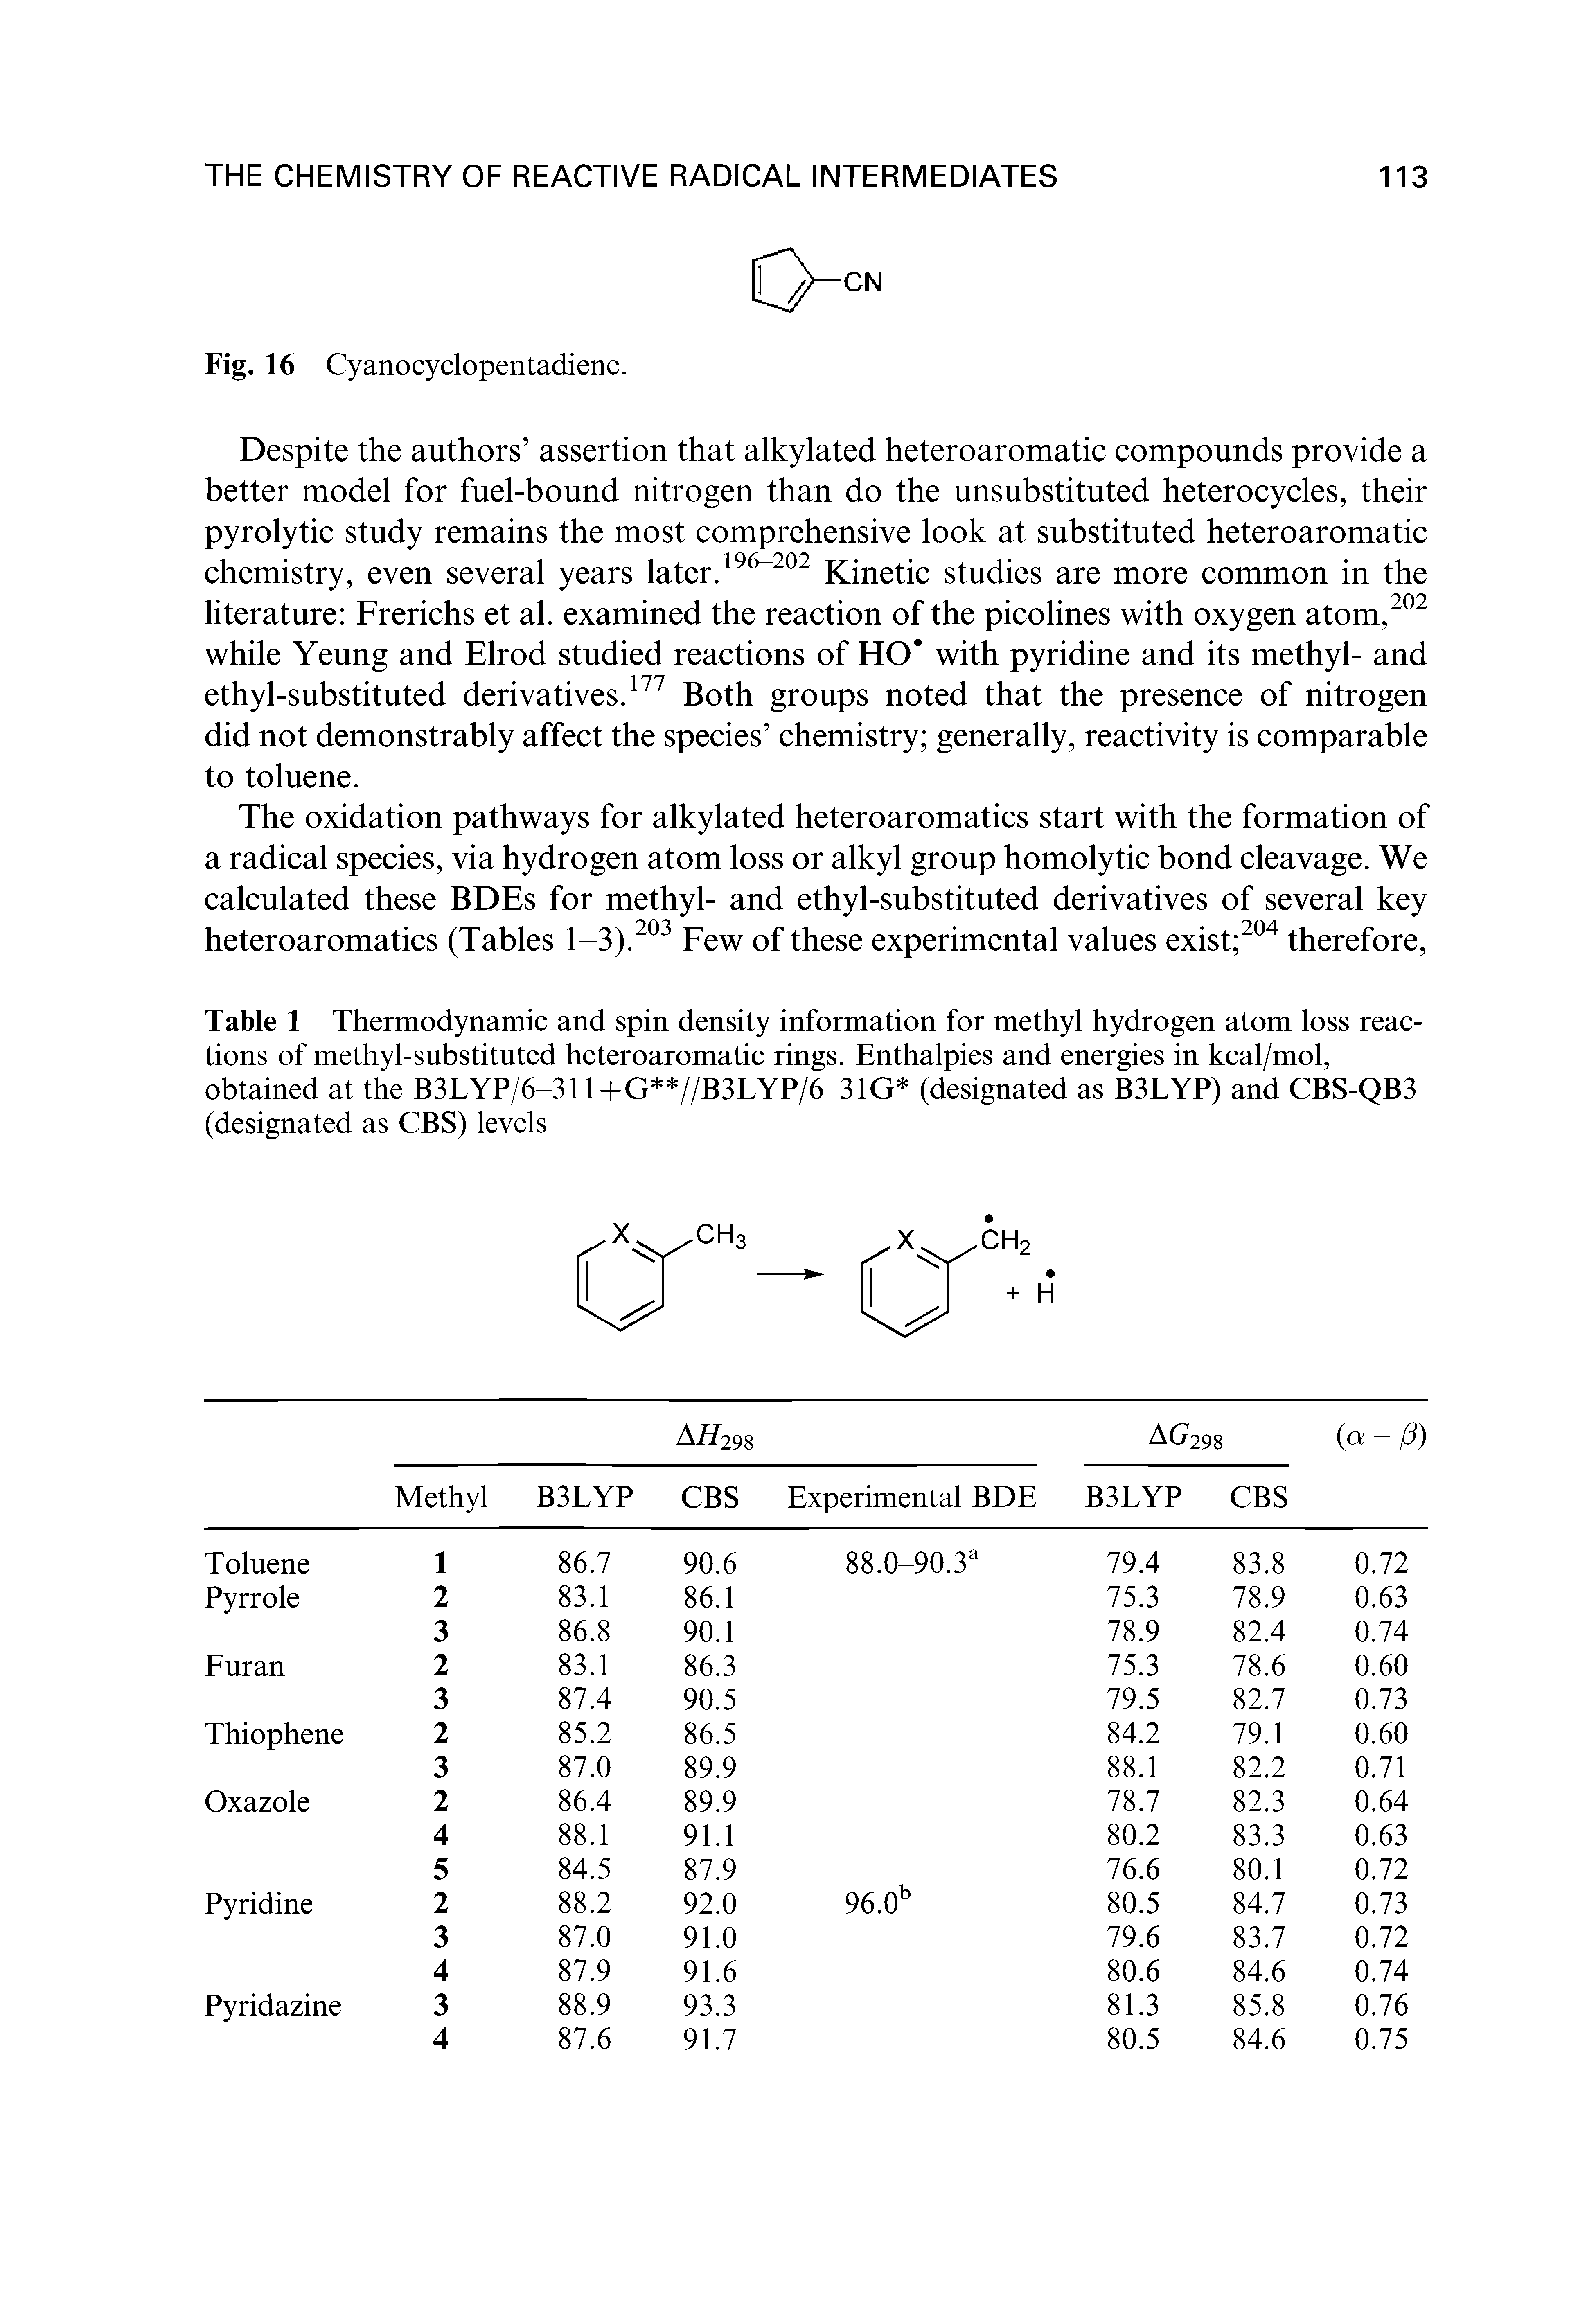 Table 1 Thermodynamic and spin density information for methyl hydrogen atom loss reactions of methyl-substituted heteroaromatic rings. Enthalpies and energies in kcal/mol, obtained at the B3LYP/6-31 l+G //B3LYP/6-31G (designated as B3LYP) and CBS-QB3 (designated as CBS) levels...